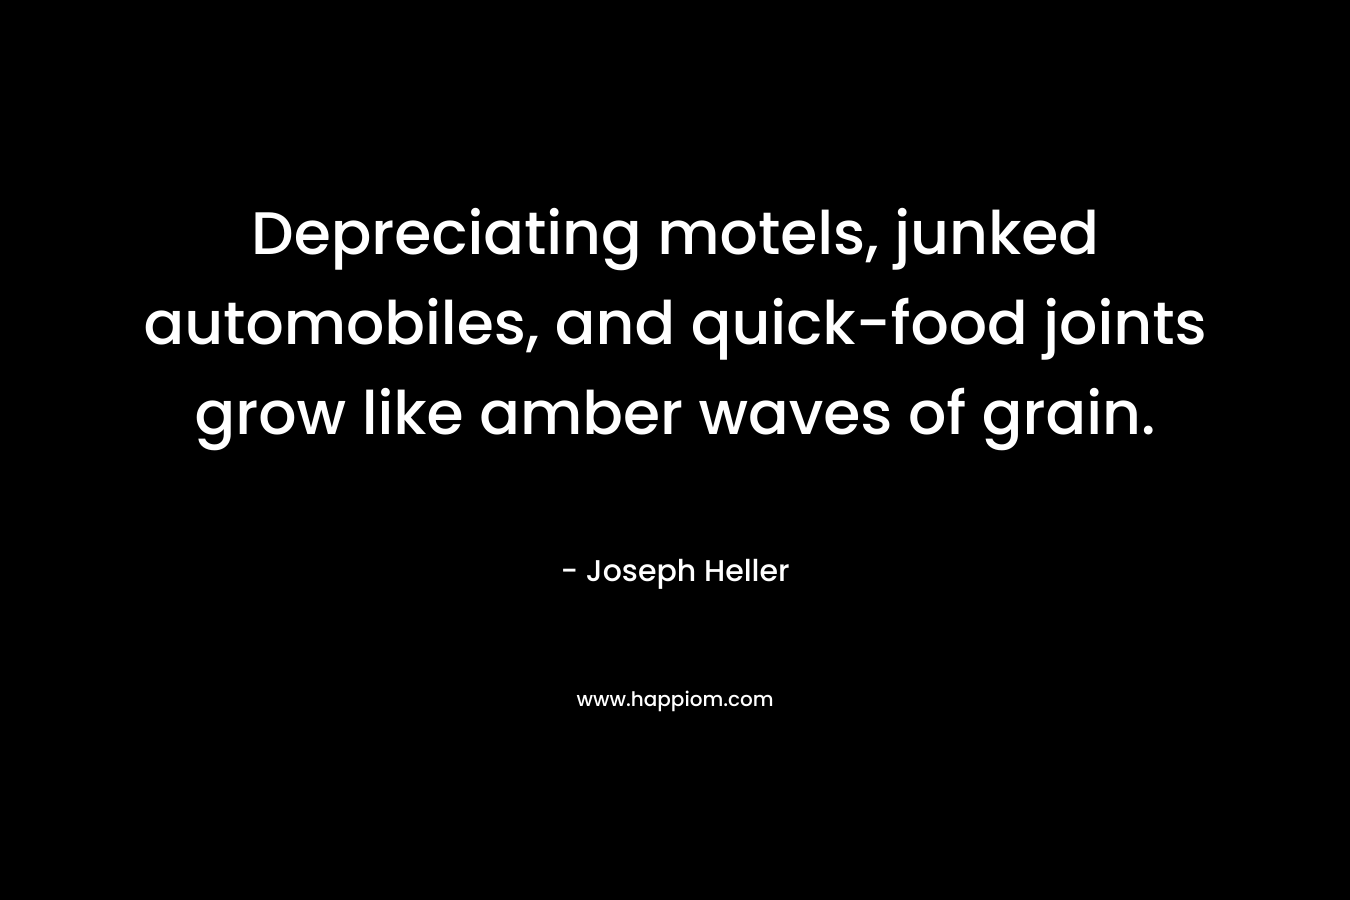 Depreciating motels, junked automobiles, and quick-food joints grow like amber waves of grain. – Joseph Heller